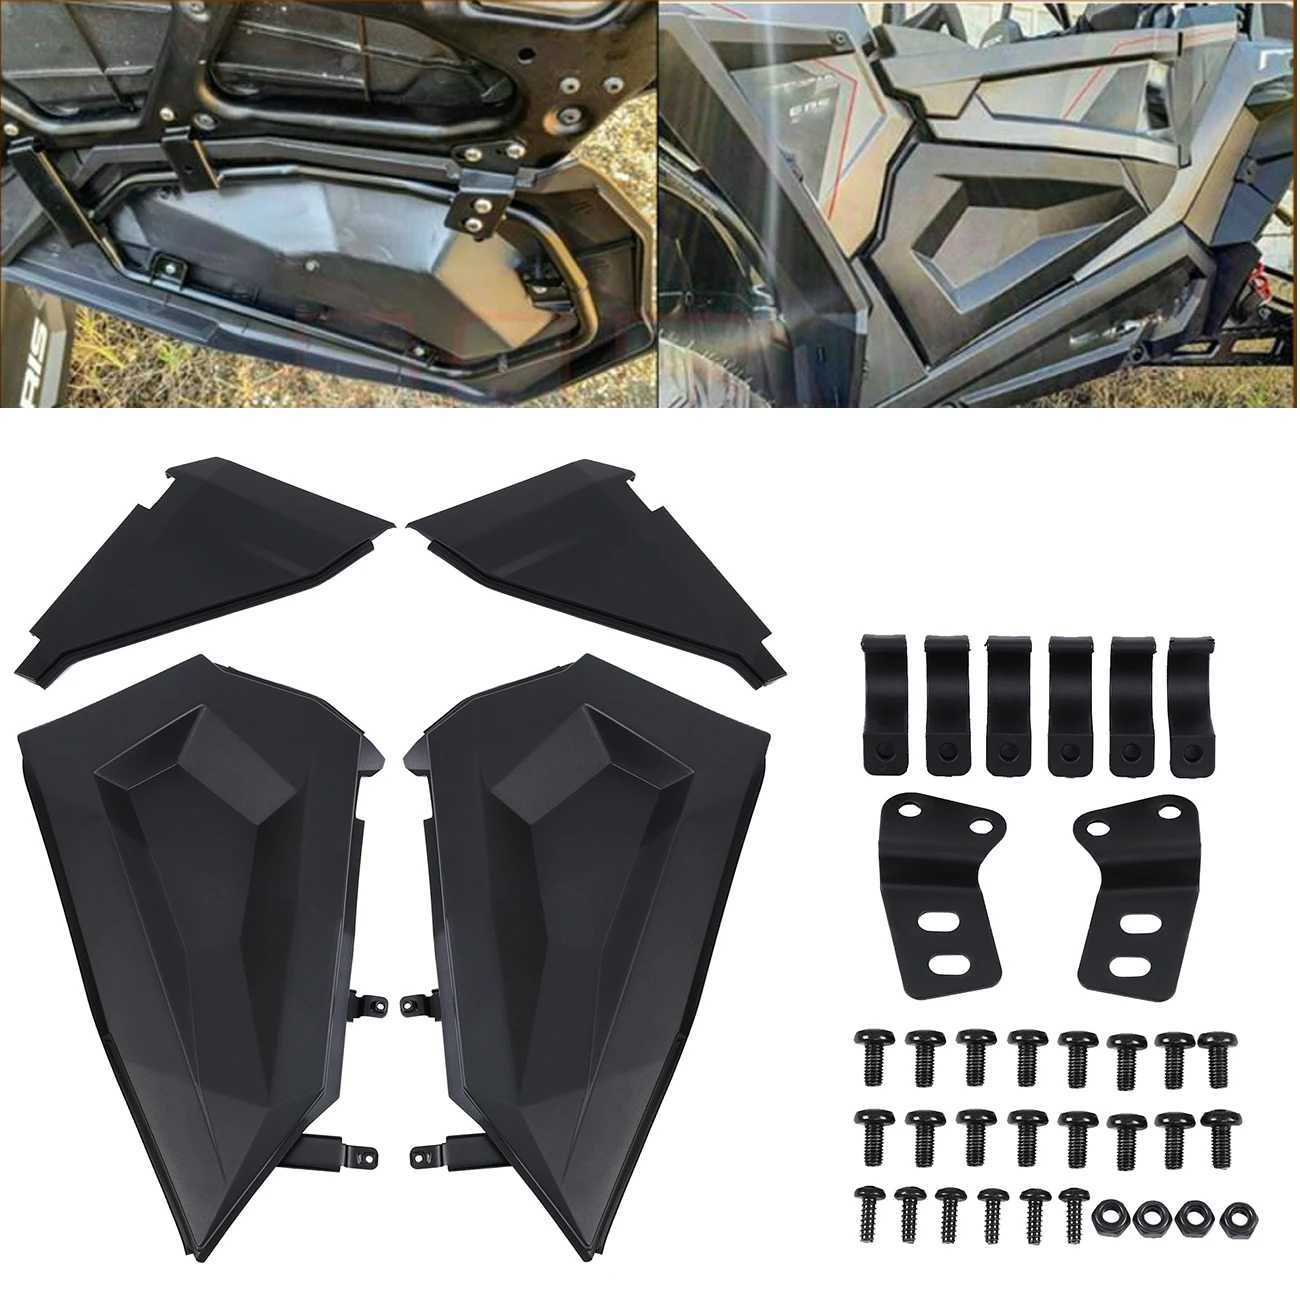 Samger 4 Doors Lower Door Paneling Inserts Kit W/ Metal Frame For Polaris RZR 900 1000 XP S Turbo 2014-2020 Easy To Install